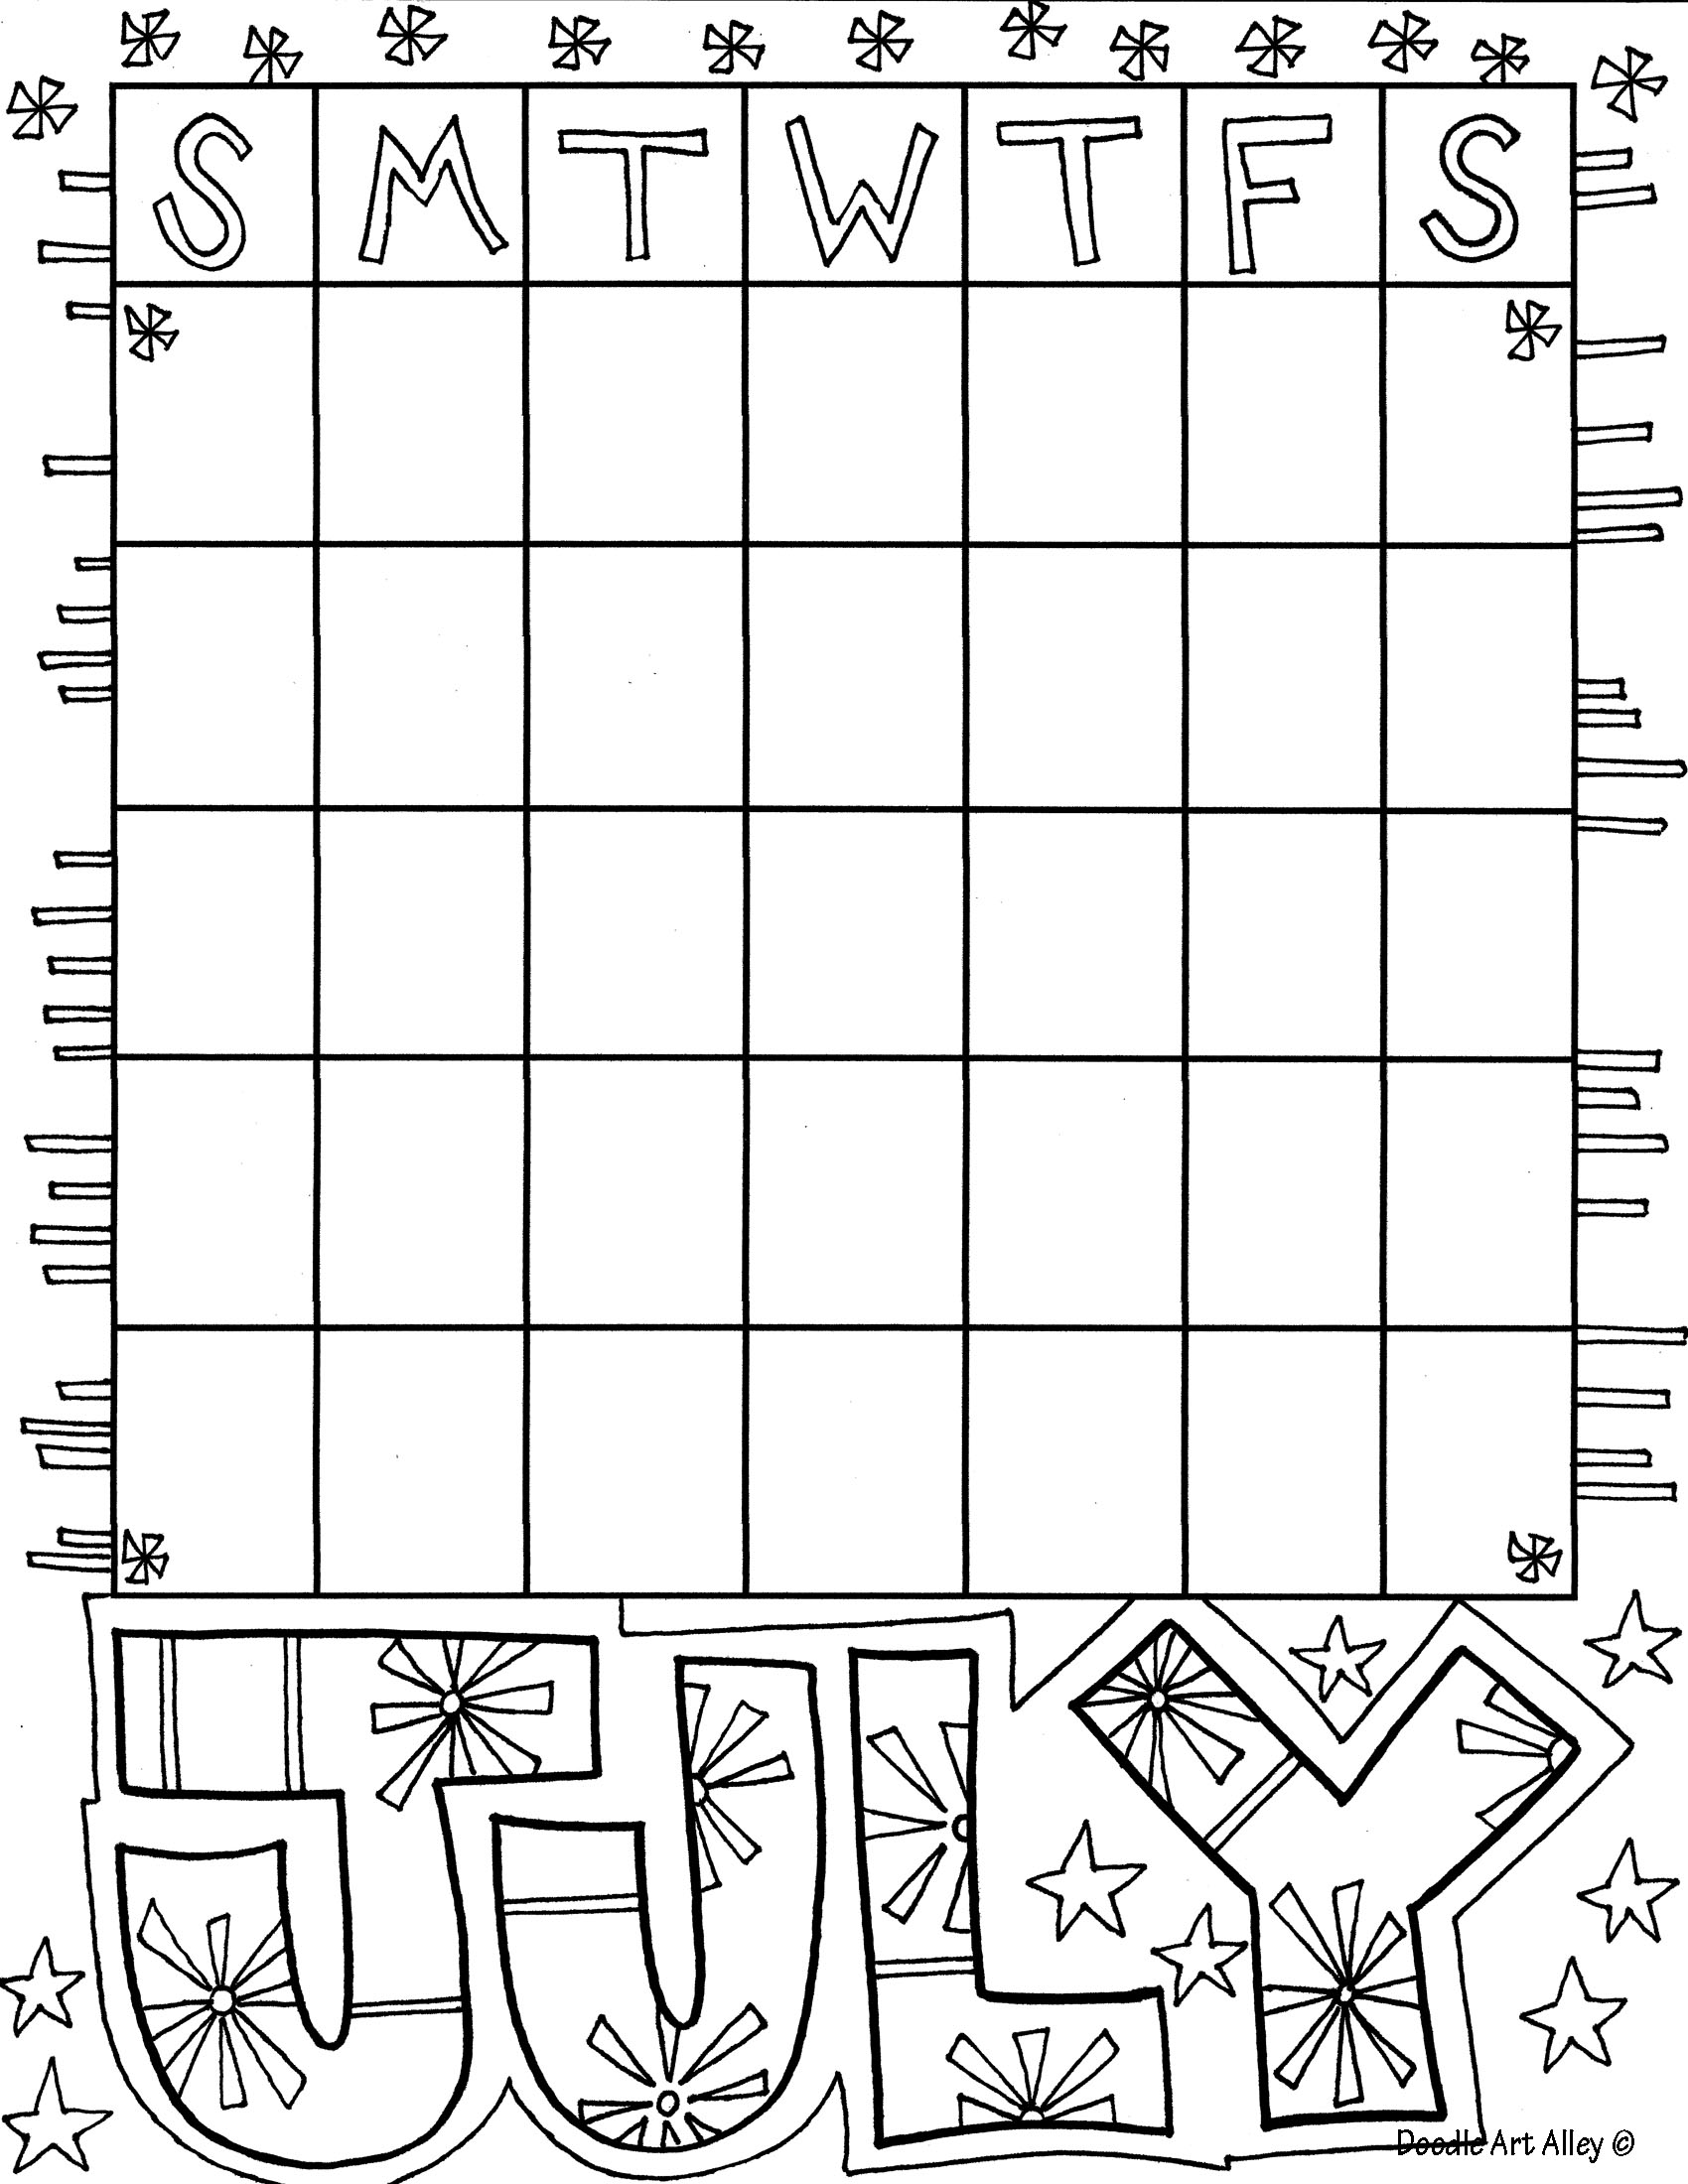 July Coloring Pages DOODLE ART ALLEY